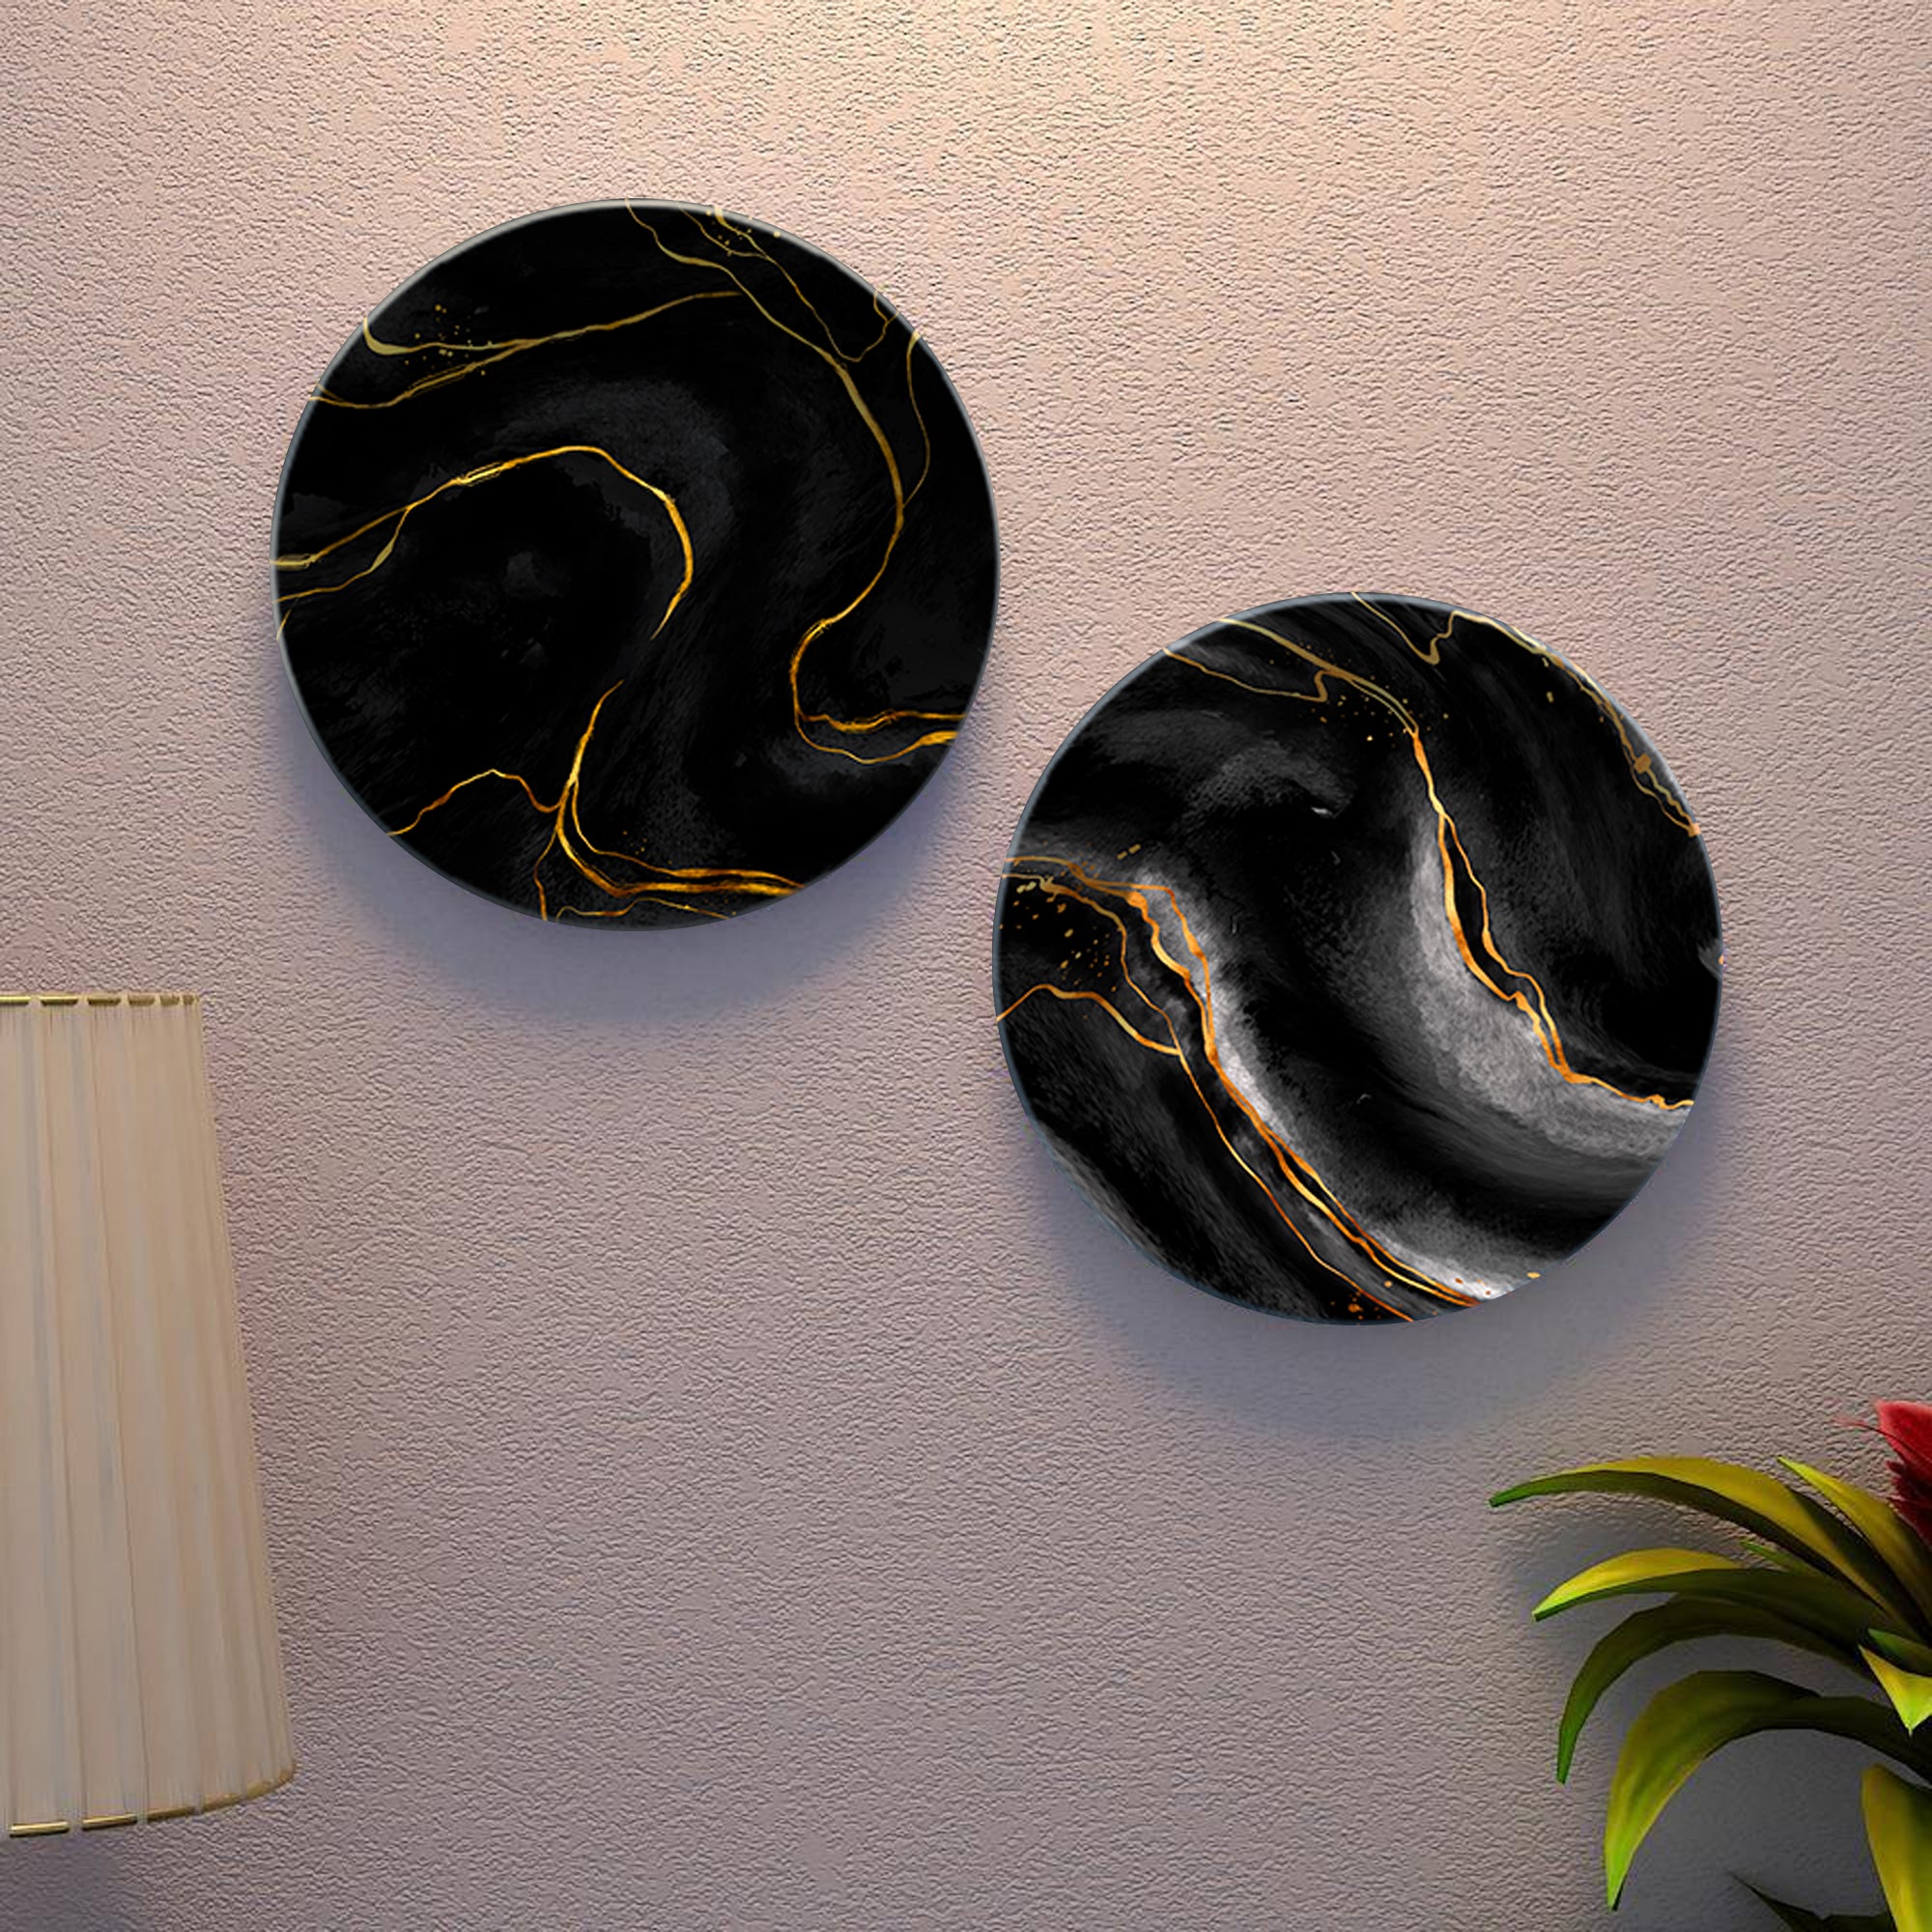  Ceramic Wall Hanging Plates of Two Pieces